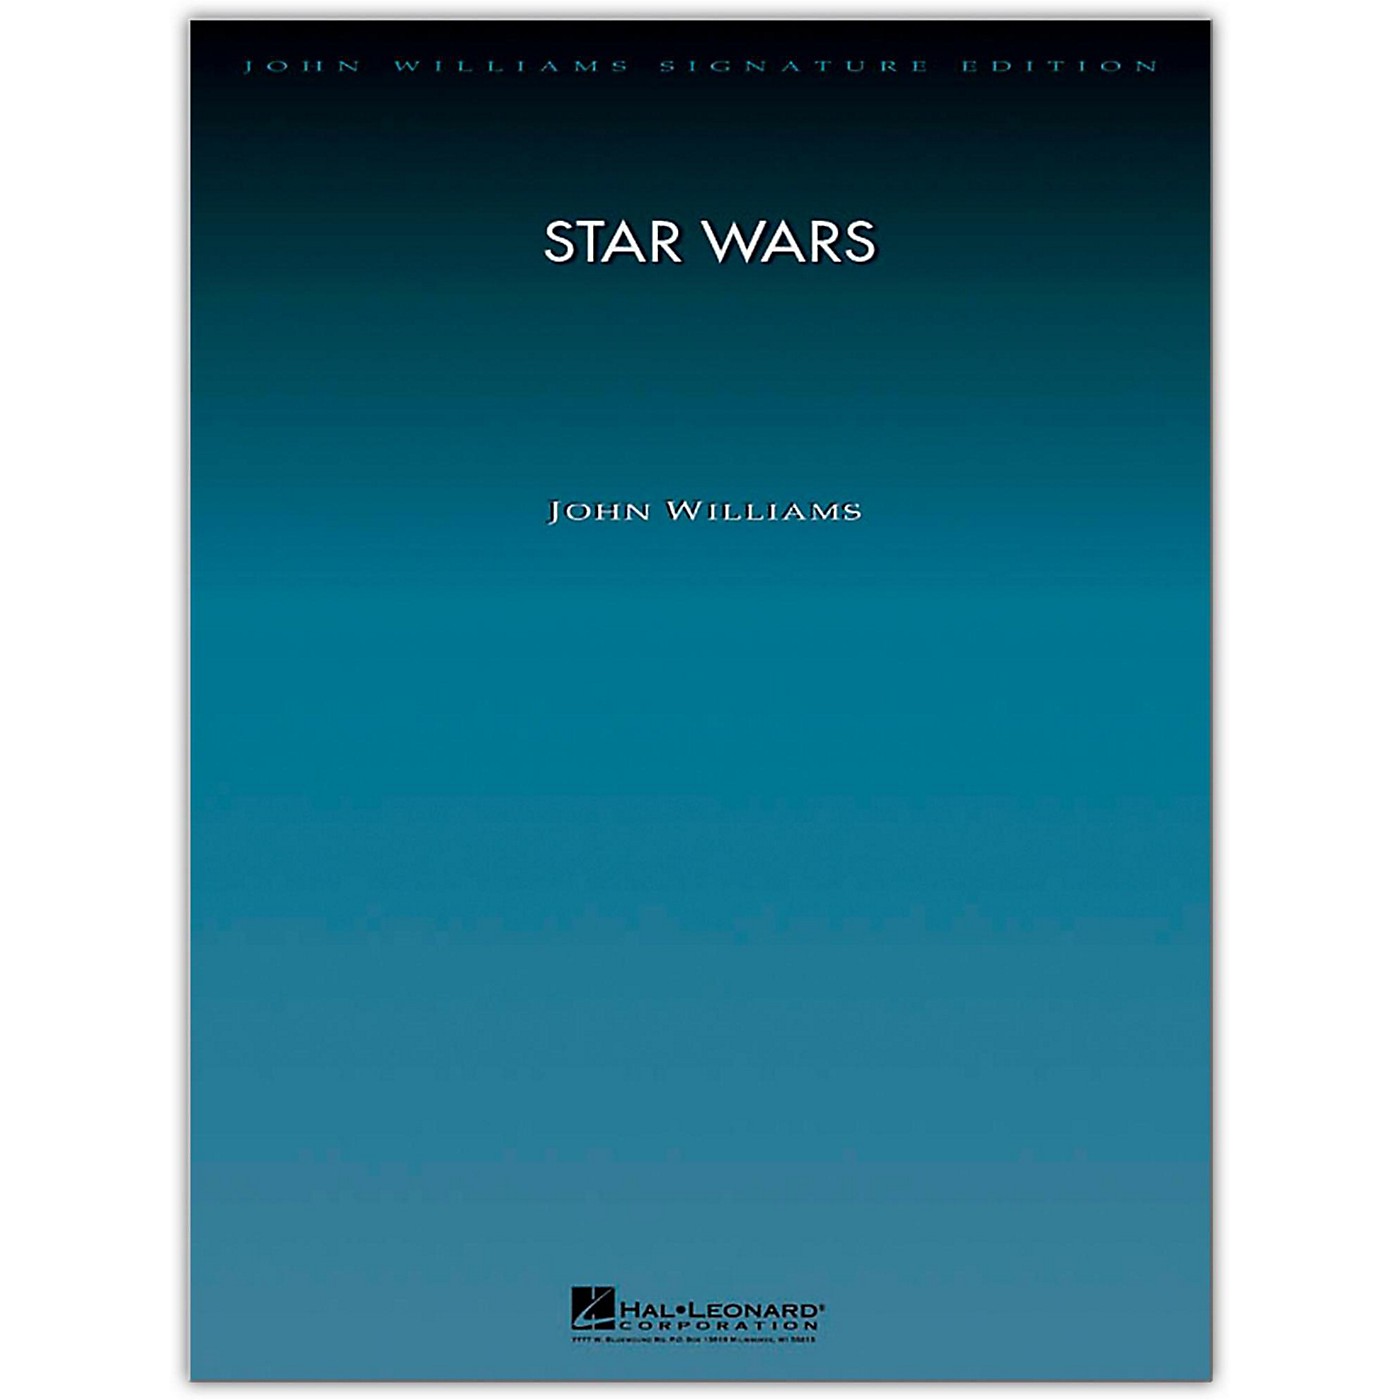 Hal Leonard Star Wars Suite for Orchestra - John Williams Signature Edition Orchestra thumbnail